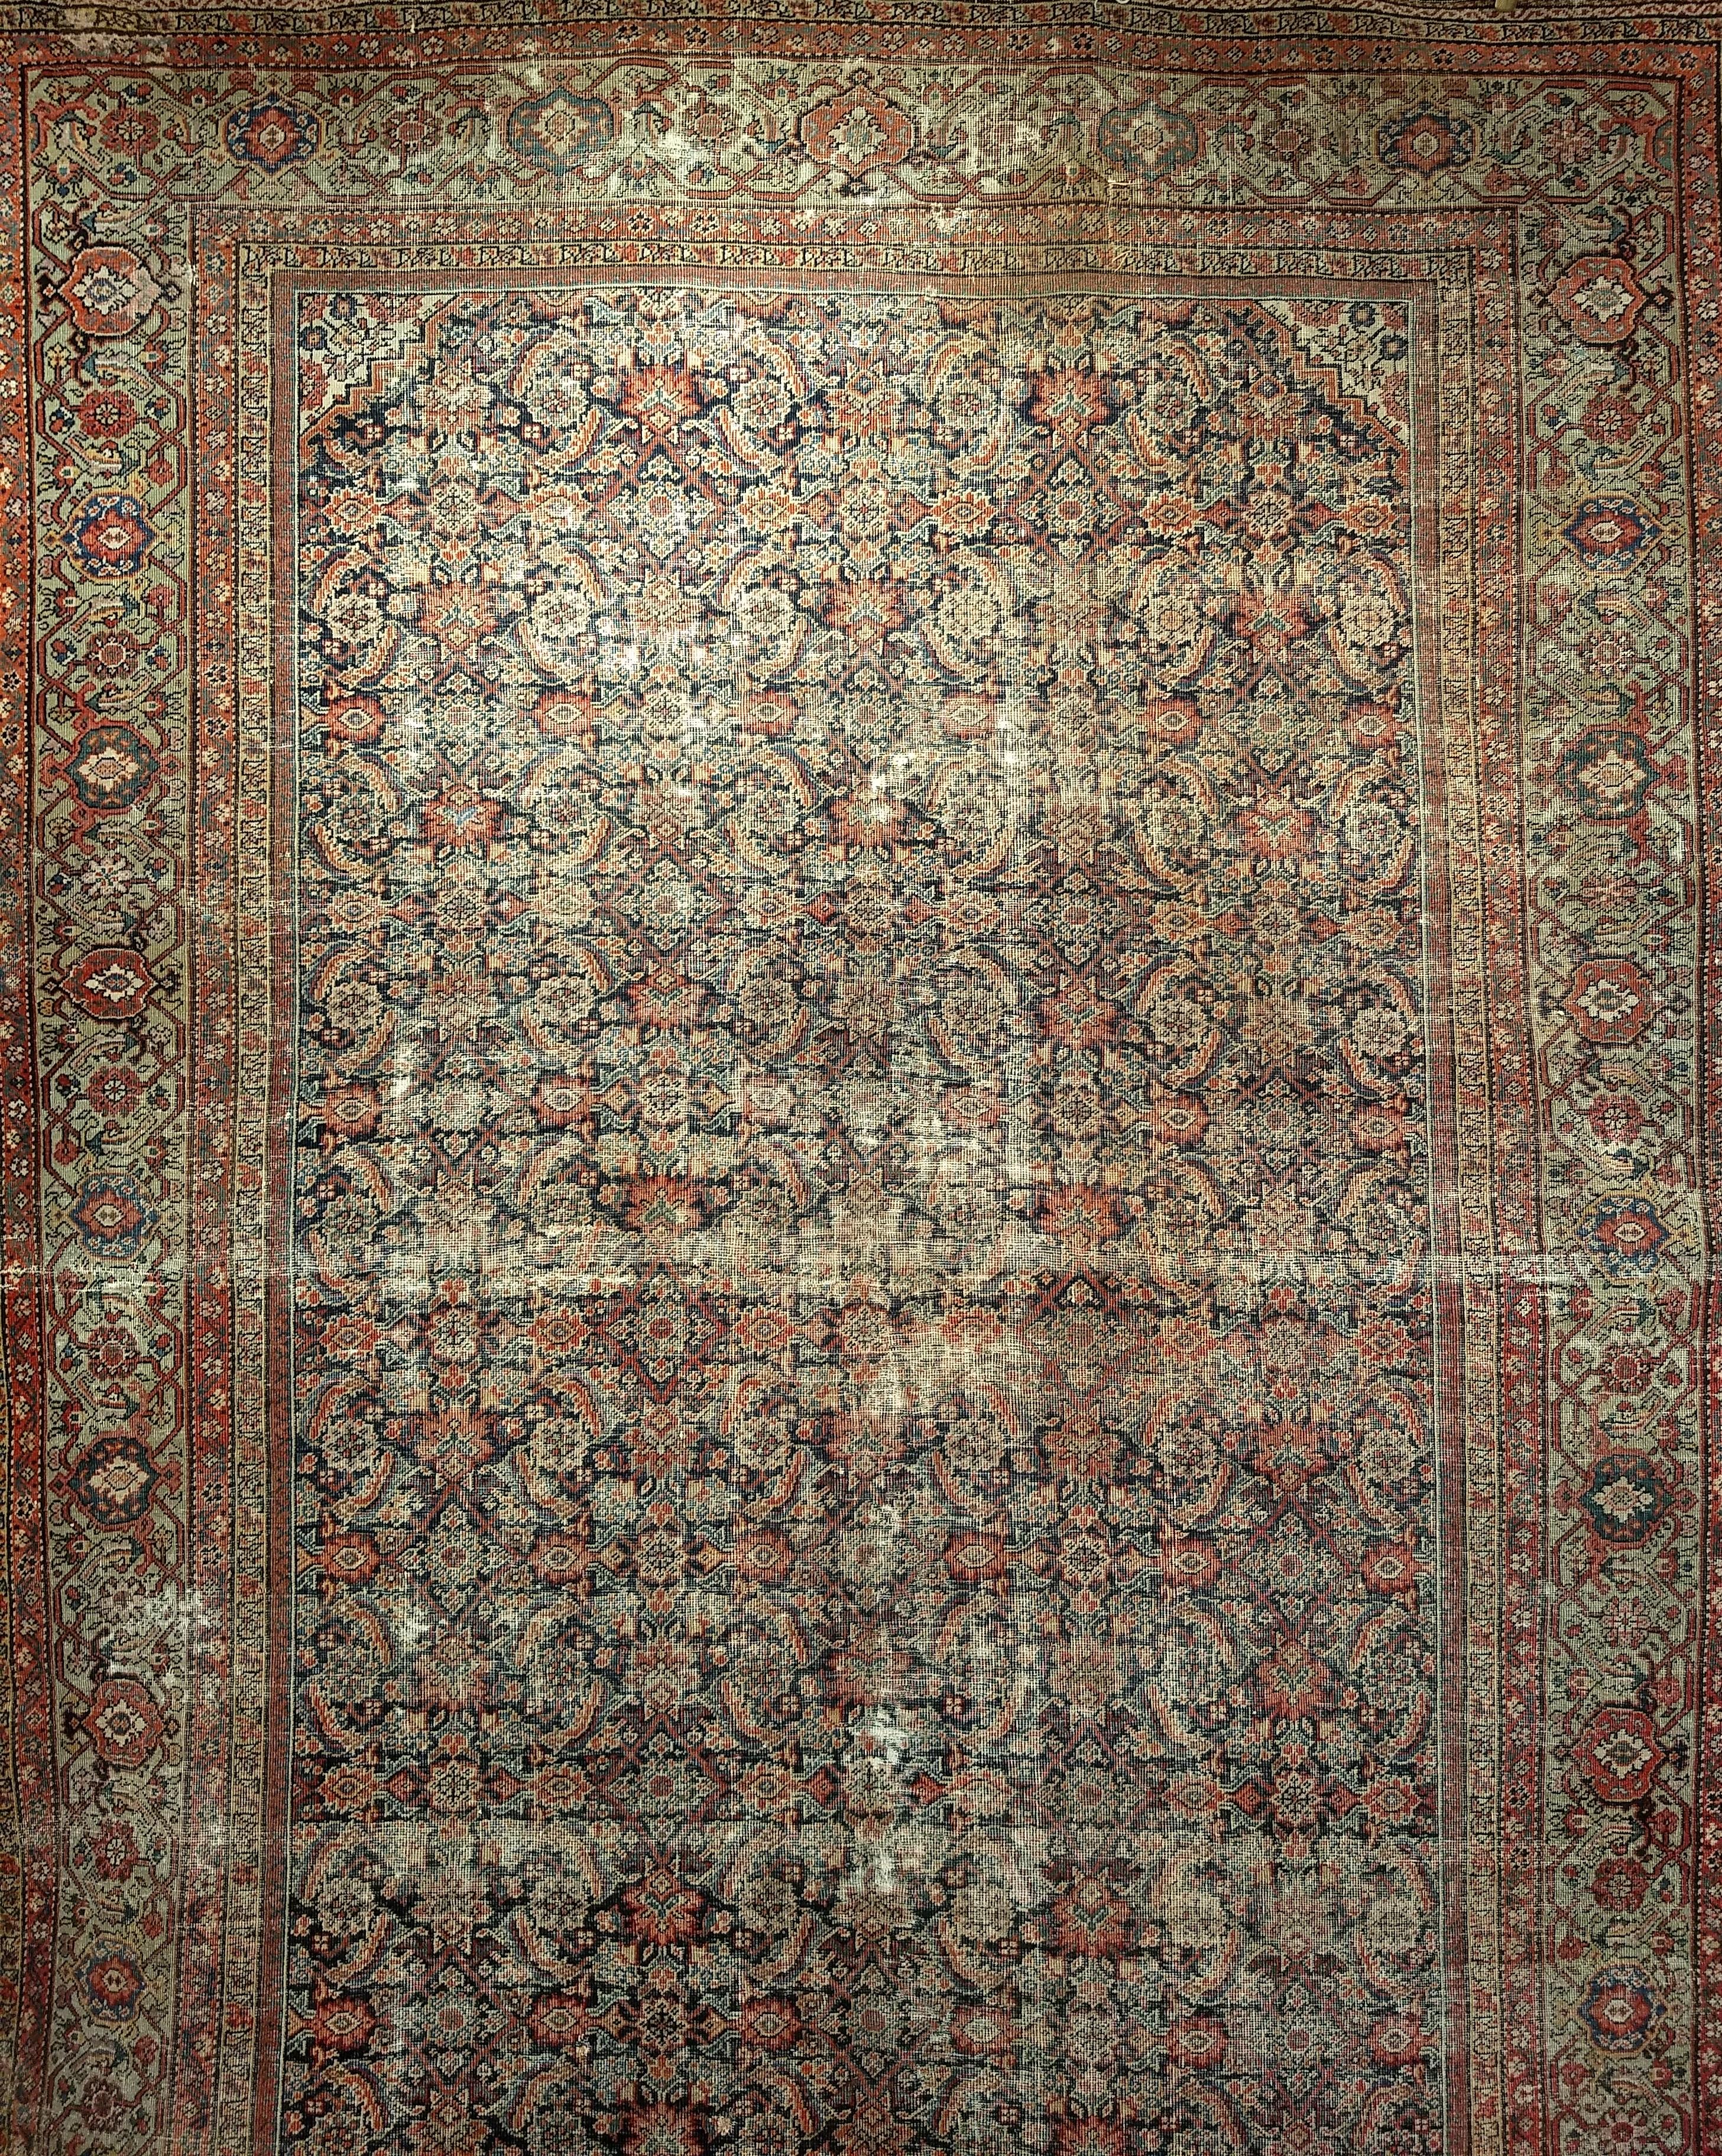 19th century Persian Farahan in an all-over Herati pattern in a room or a gallery/library size.  This extremely finely hand woven Farahan rug from Western Persia has a “Herati” all-over pattern set in a navy blue color field with designs in brick